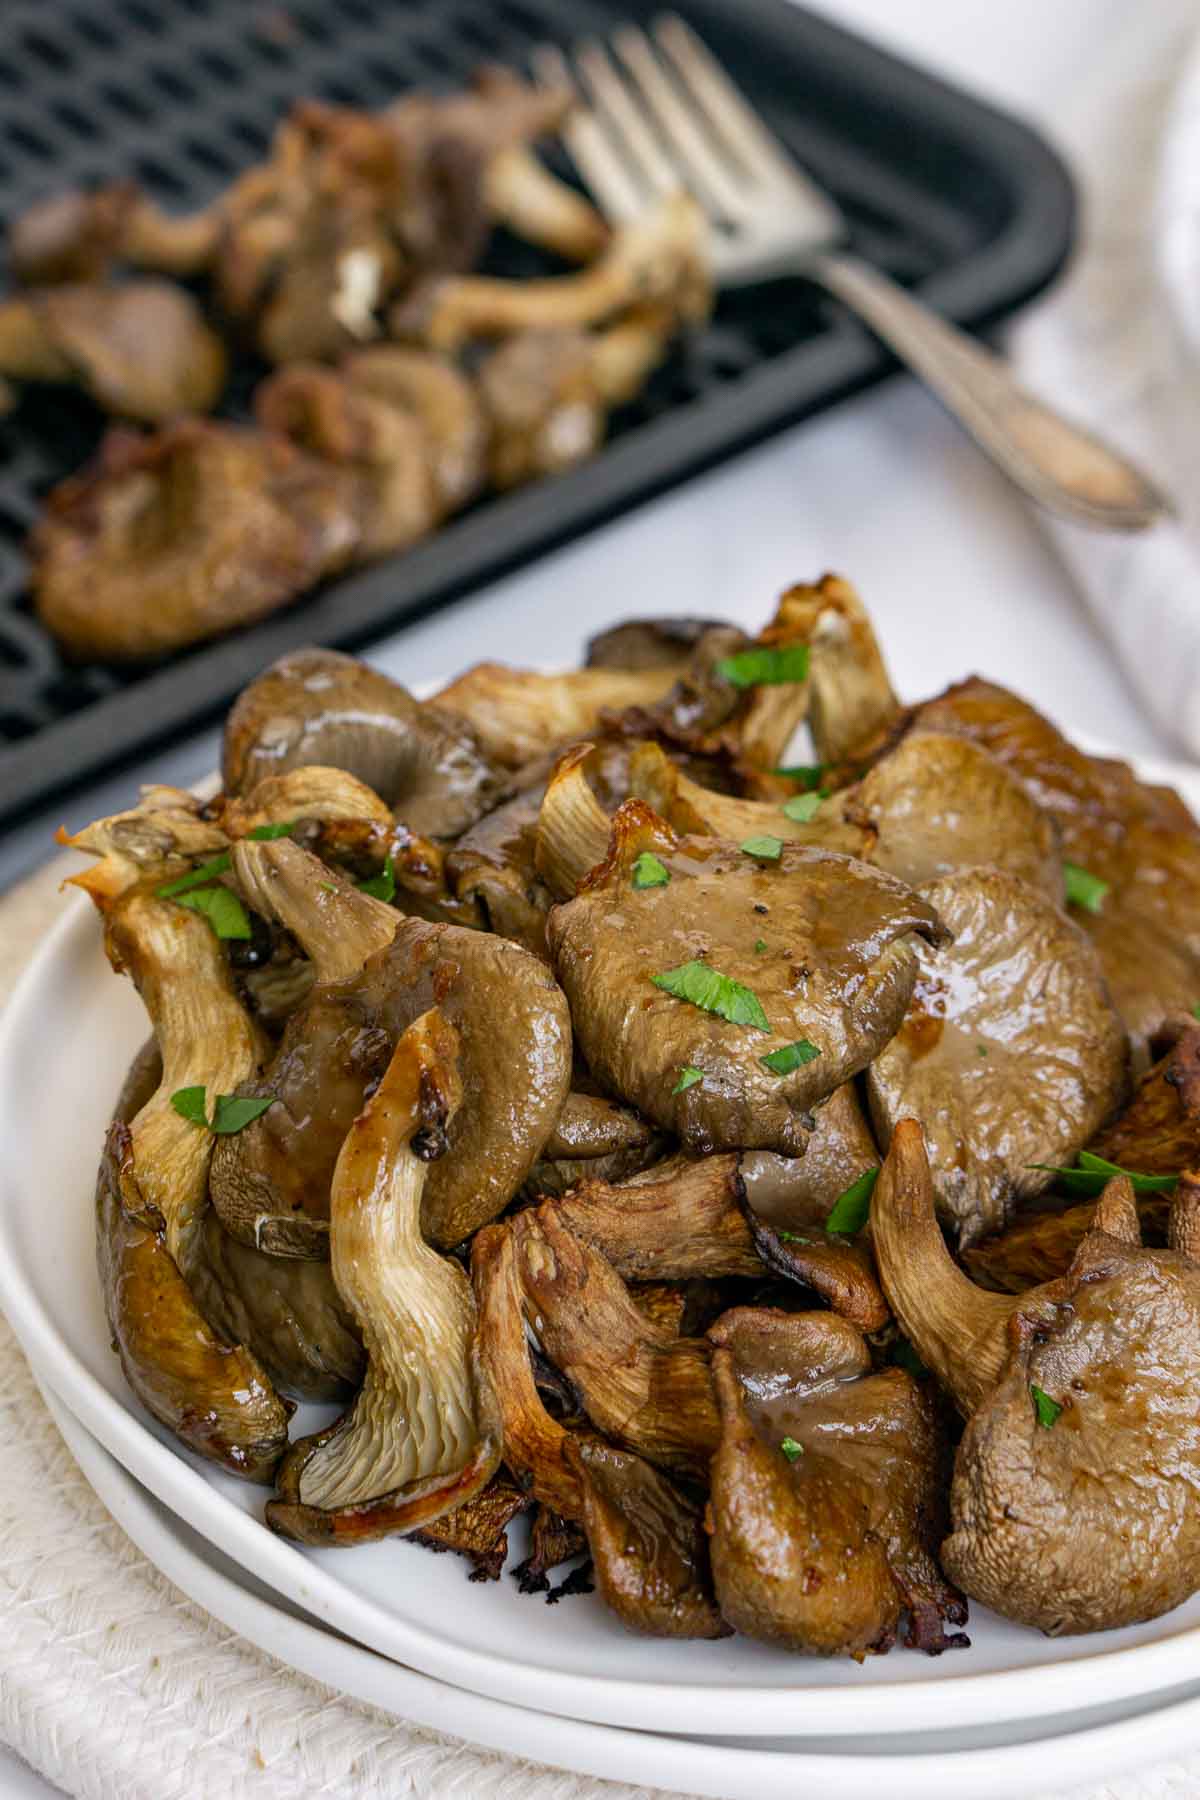 Plate of cooked oyster mushrooms.